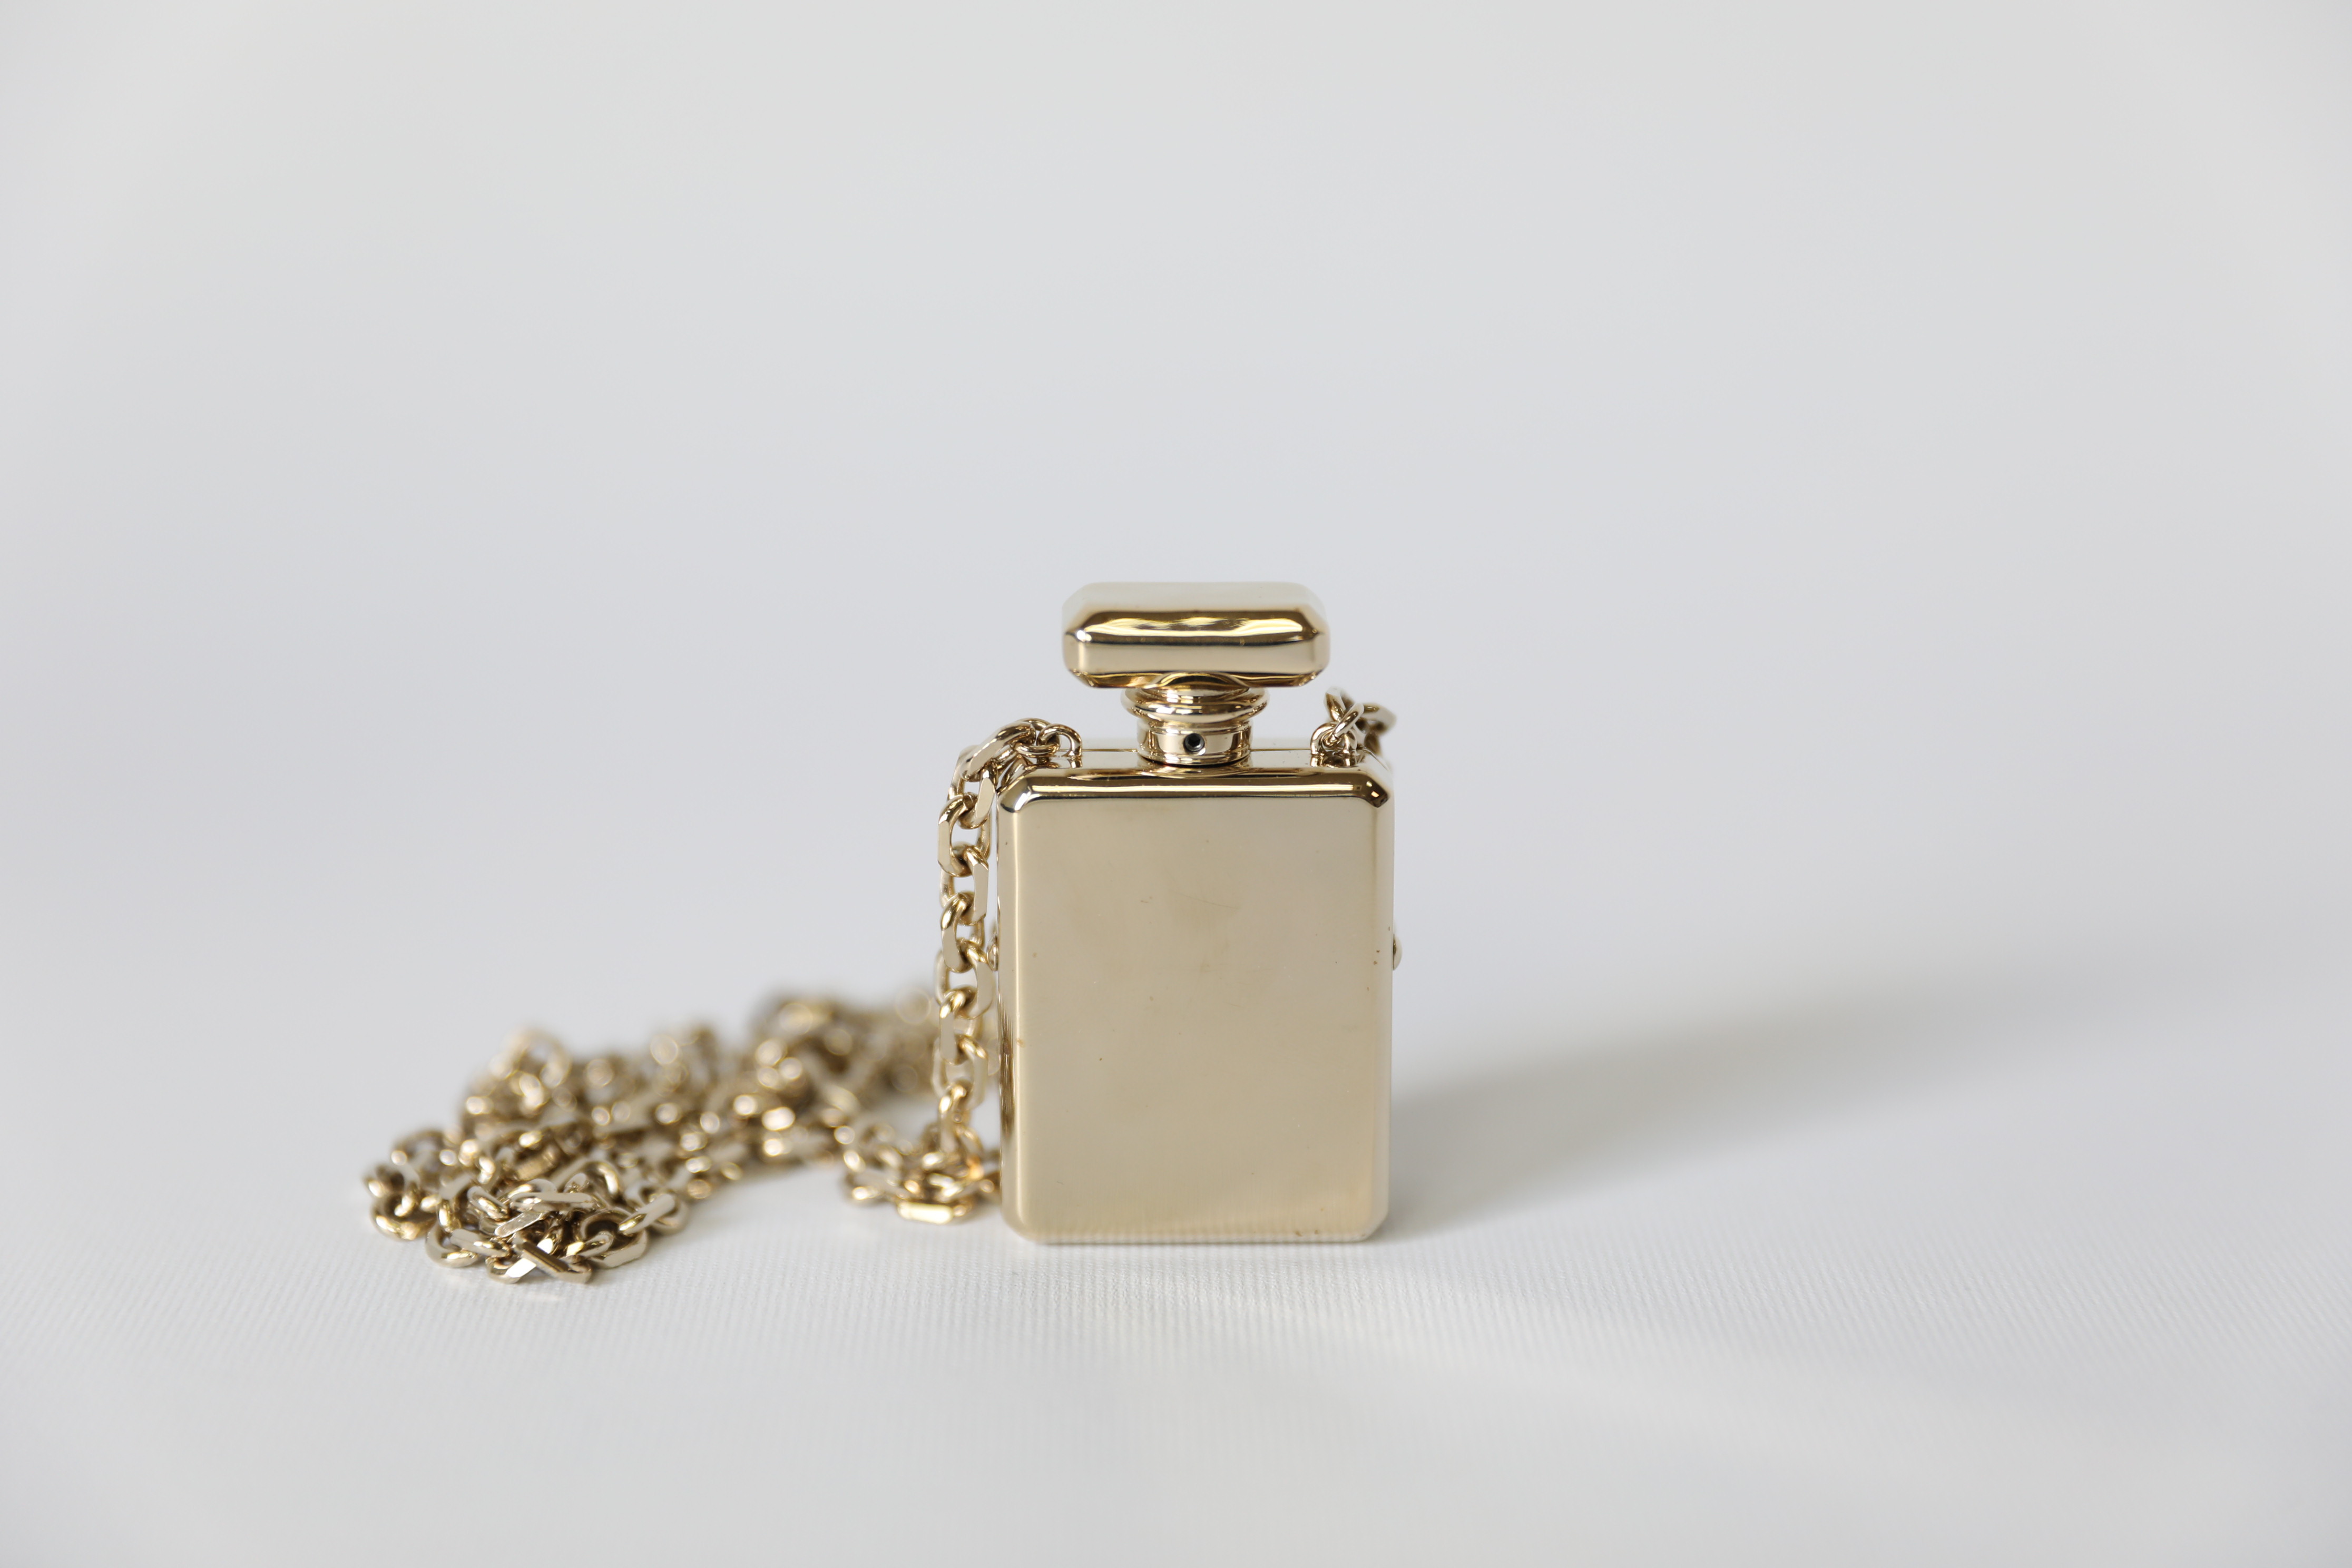 CHANEL Repurposed Jewelry, Gold Necklaces – Bag Envy